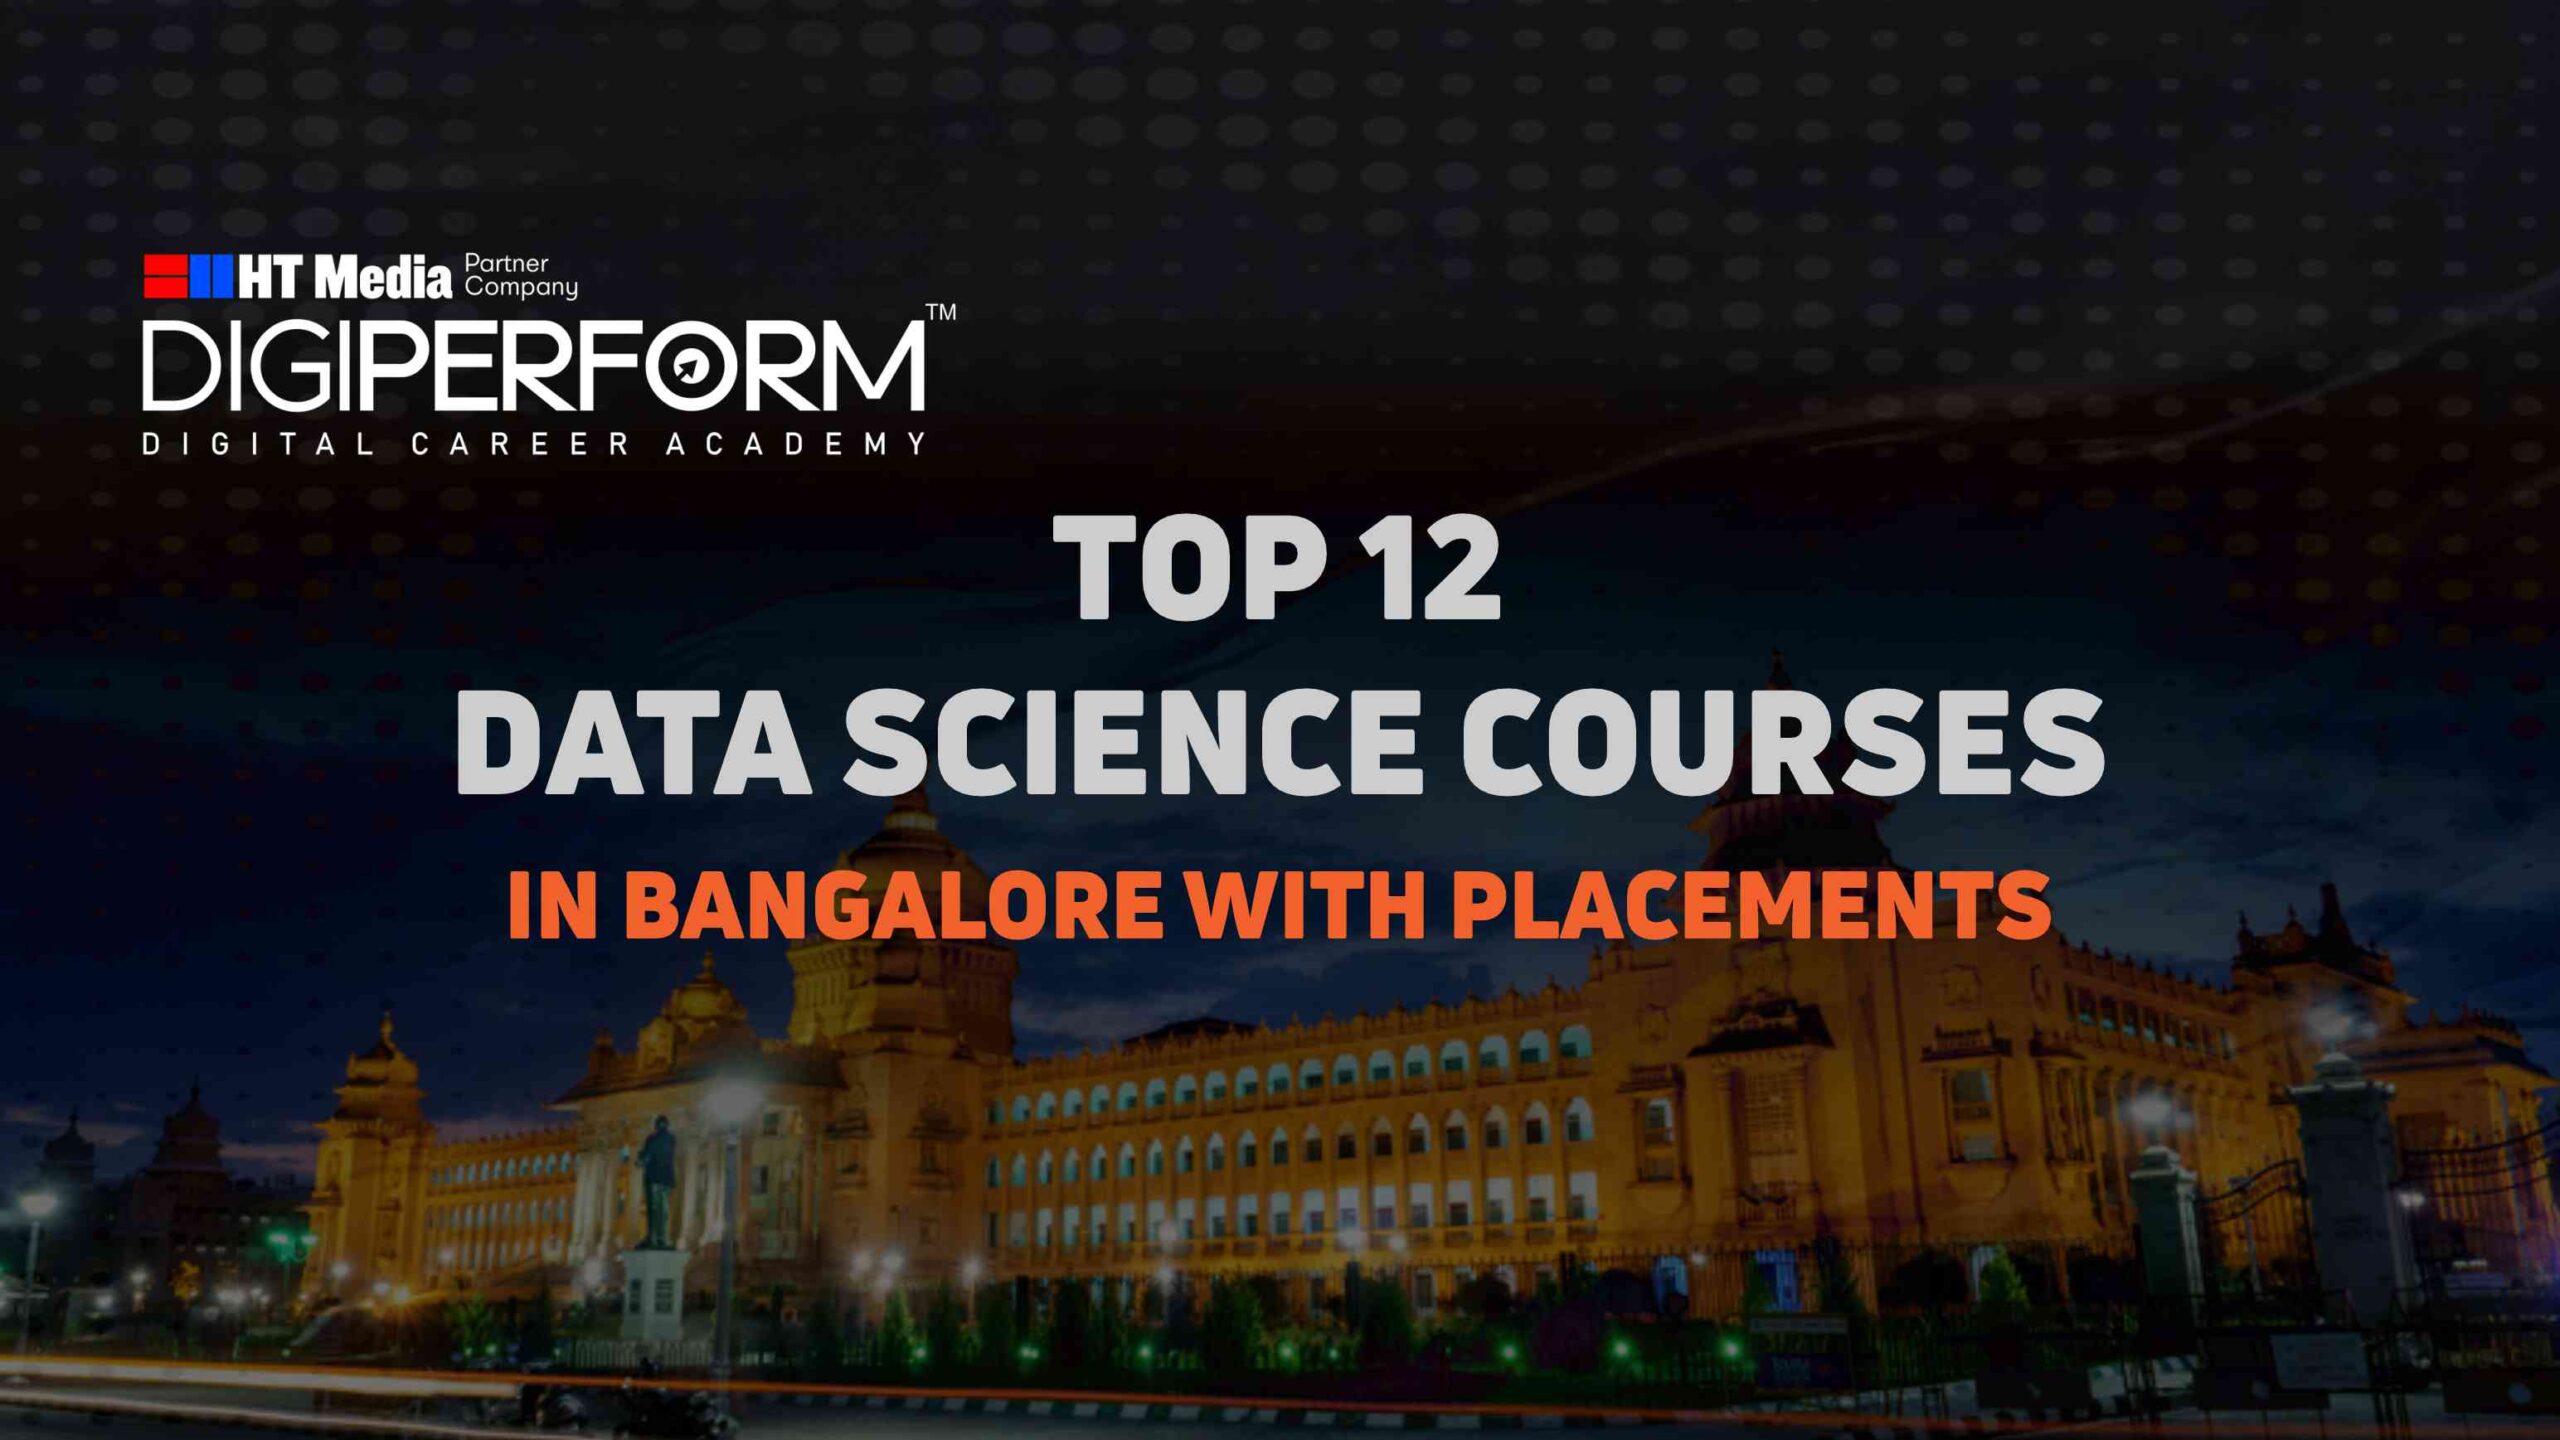 Top 12 Data Science Courses in Bangalore with Placements